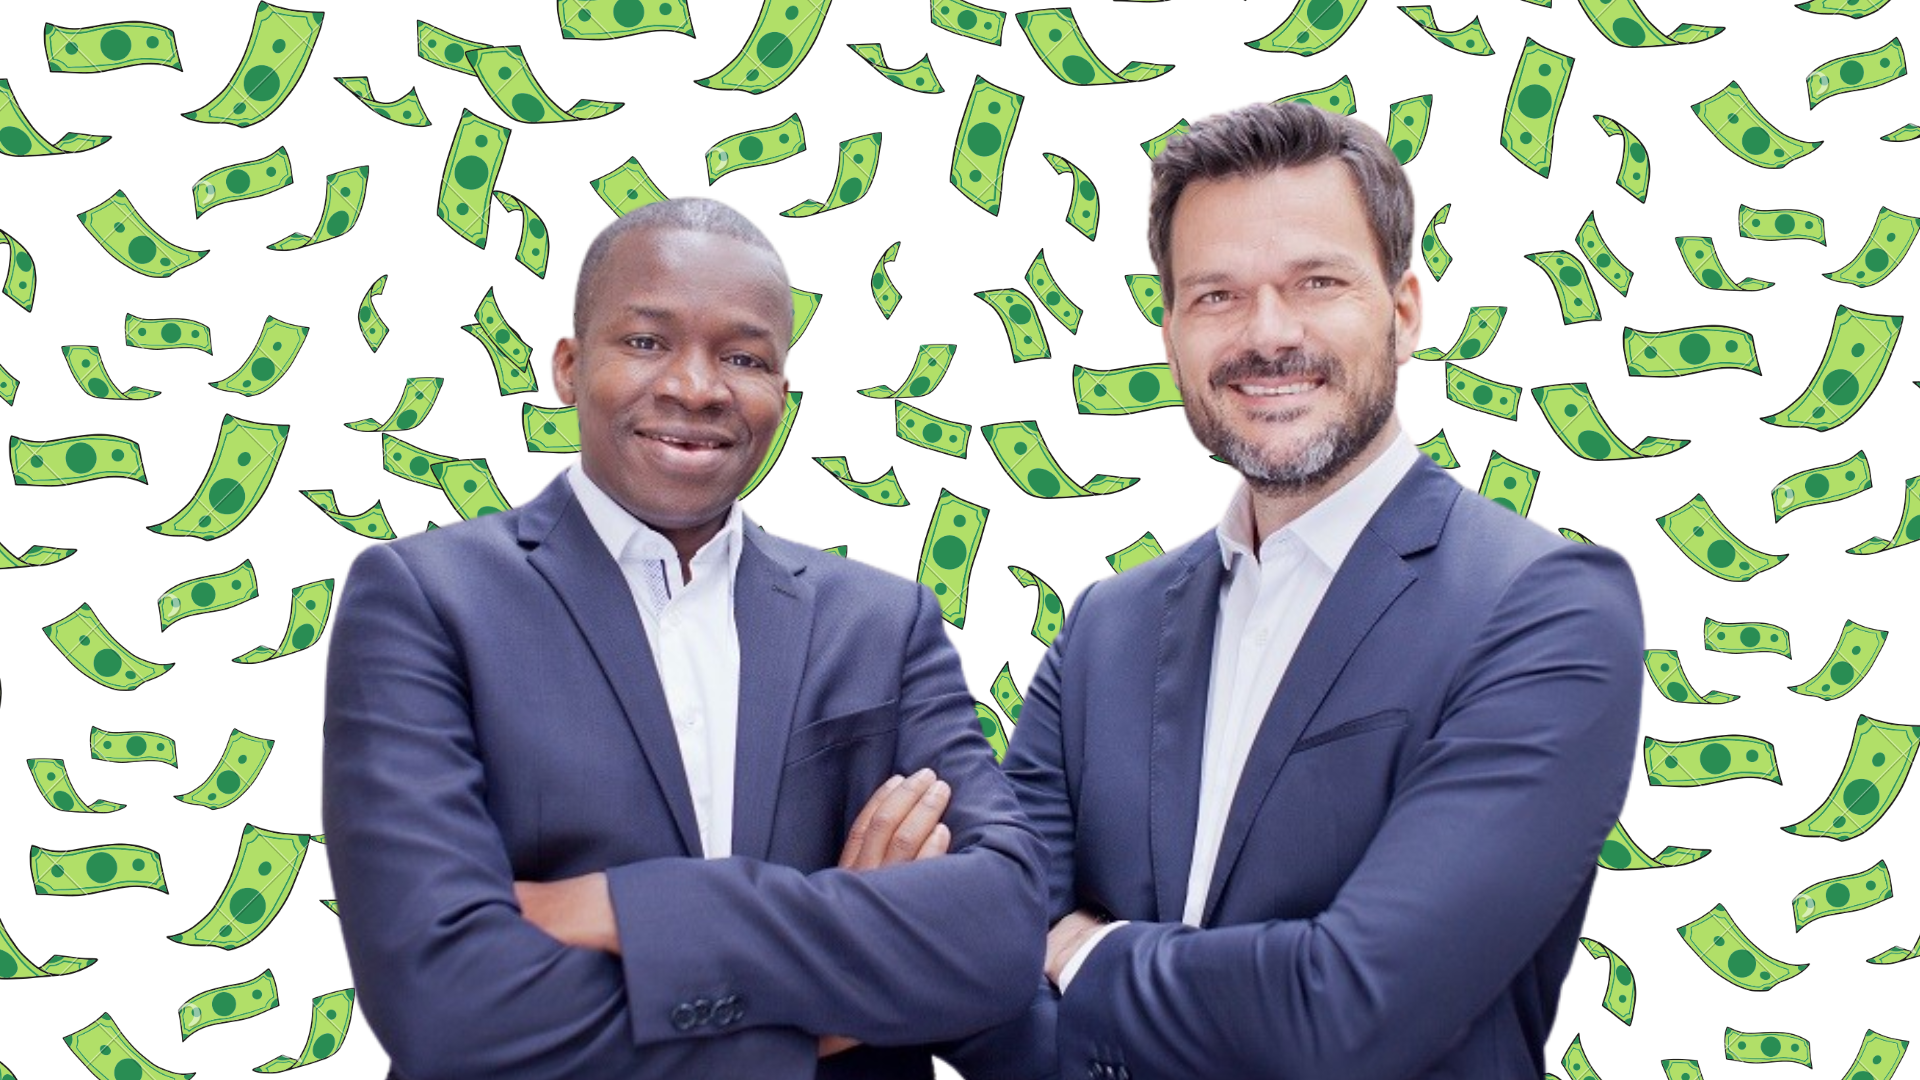 Partech; its €280 million fund, backing bold founders, and being intentional about exits